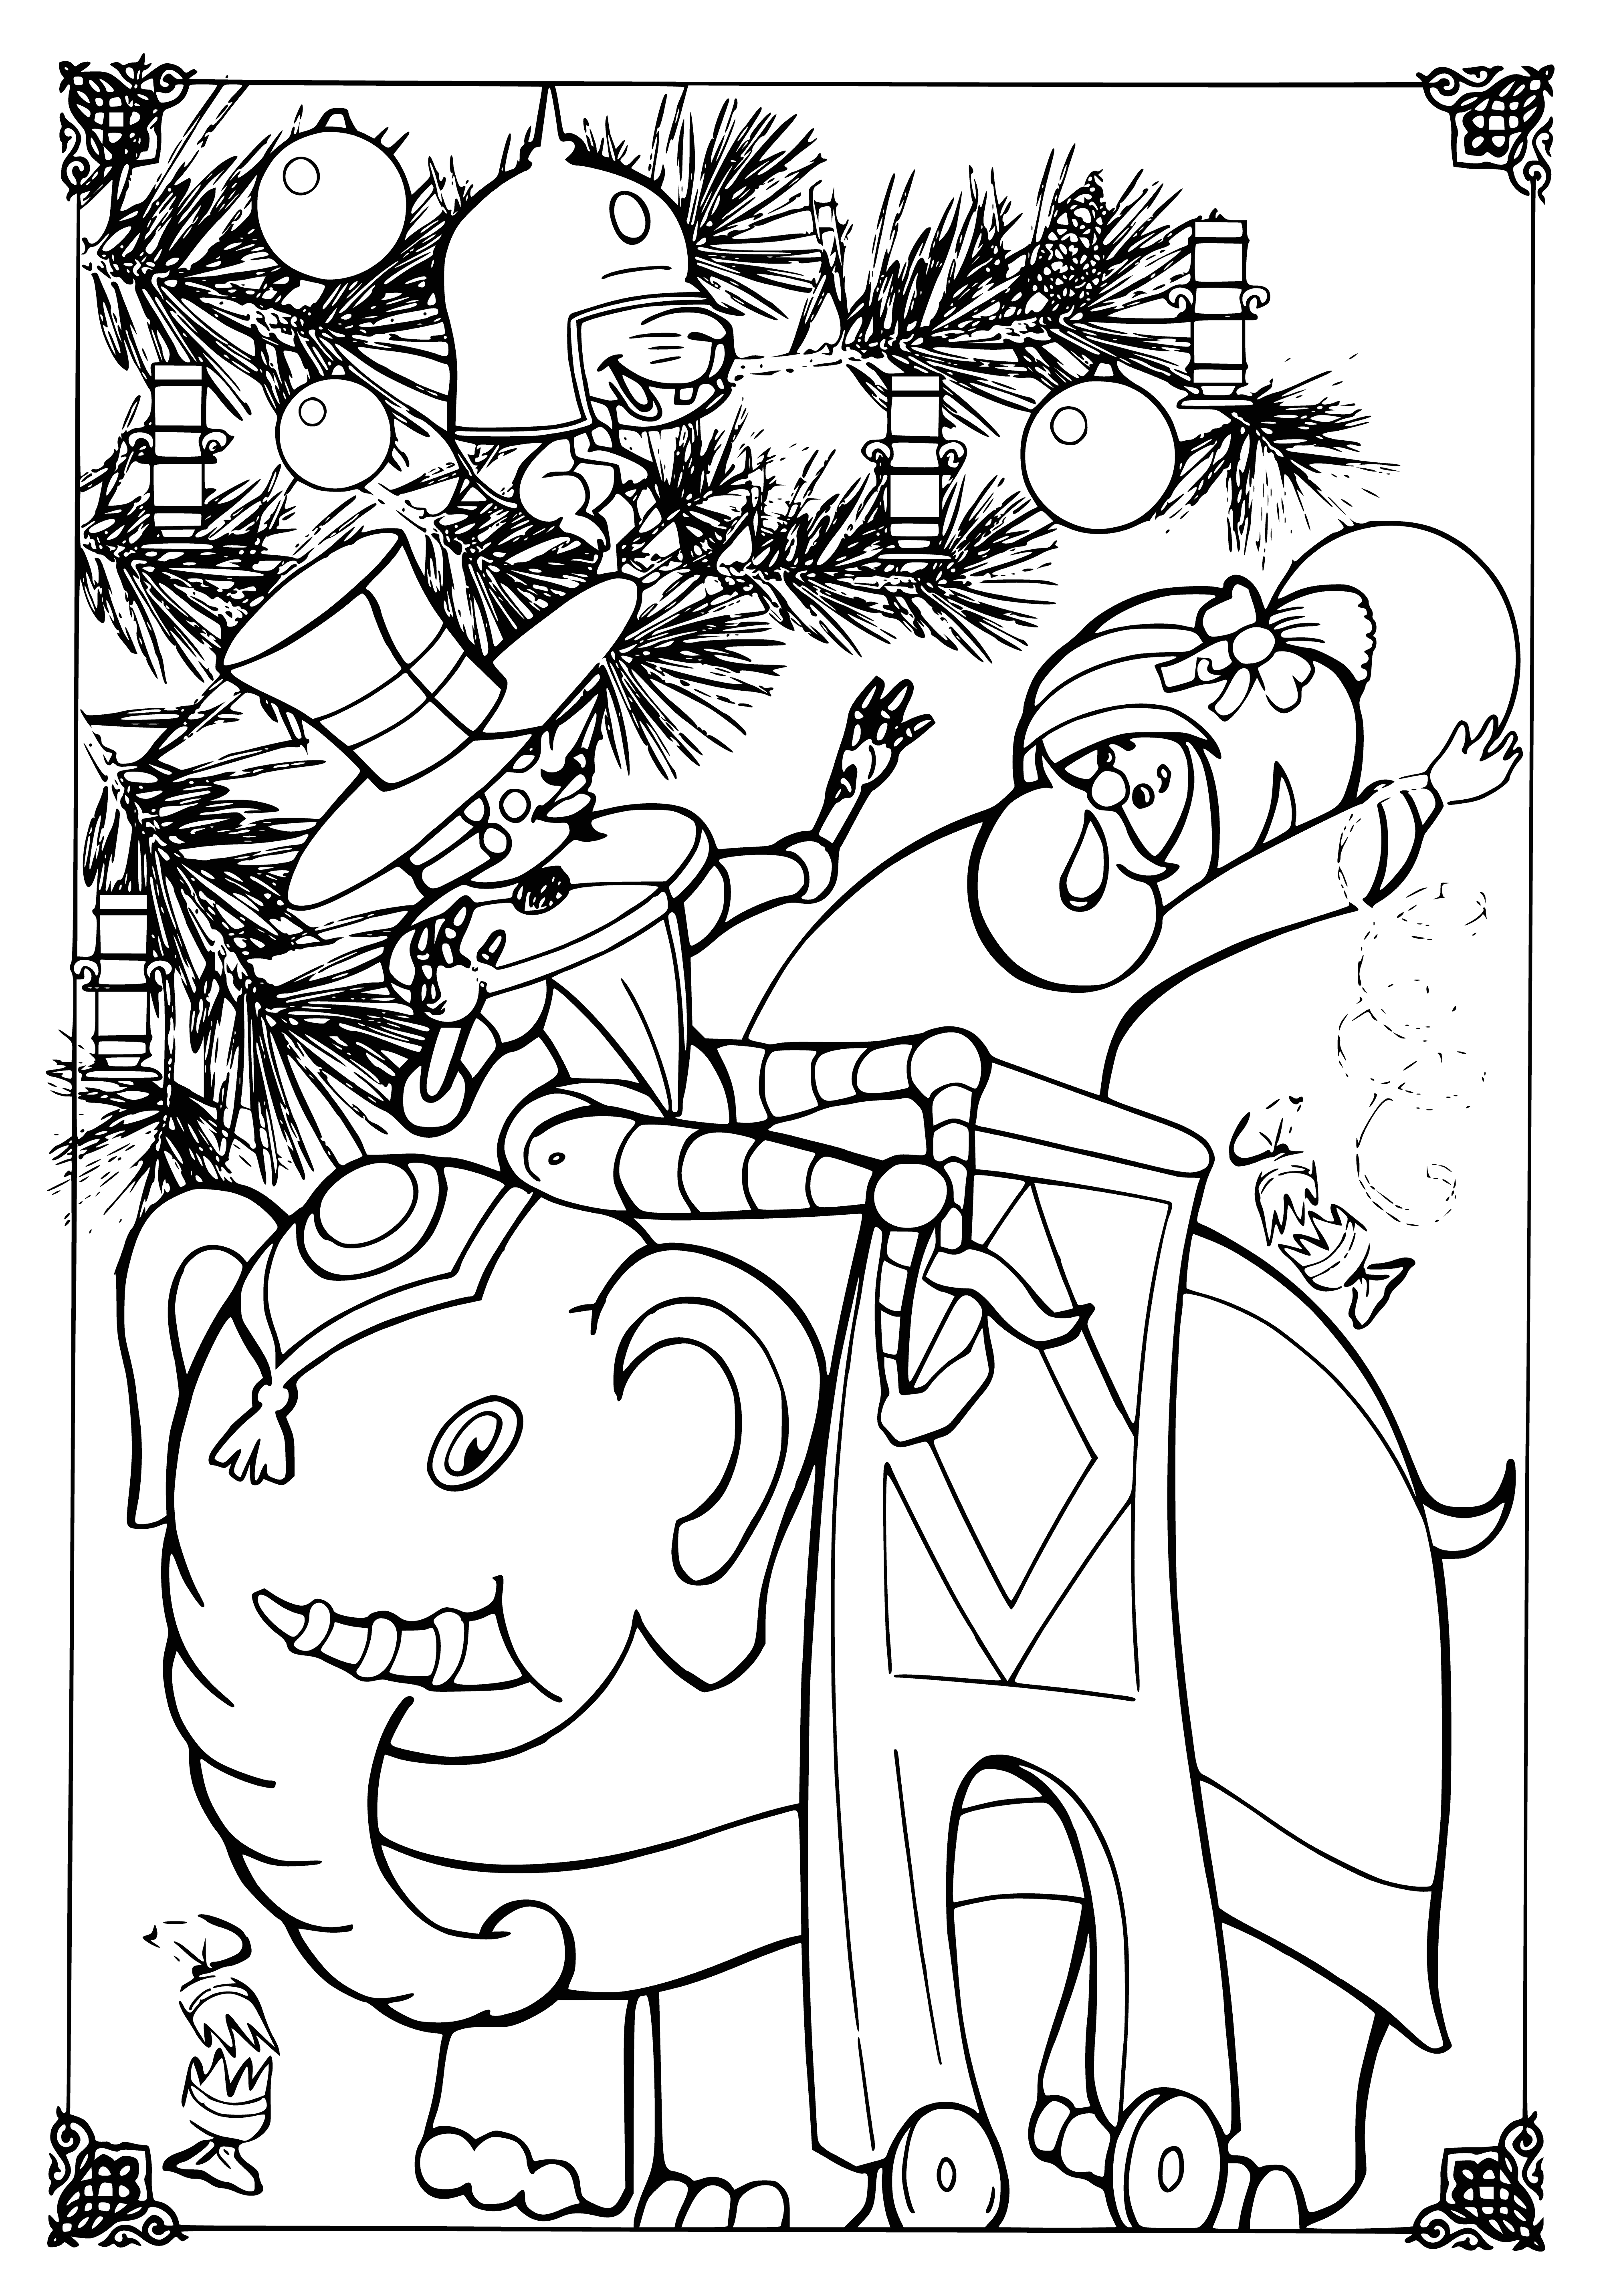 coloring page: Men in 2 rows wearing brightly-col'd clothes, arms crossed/behind backs, long-hair all looking left.